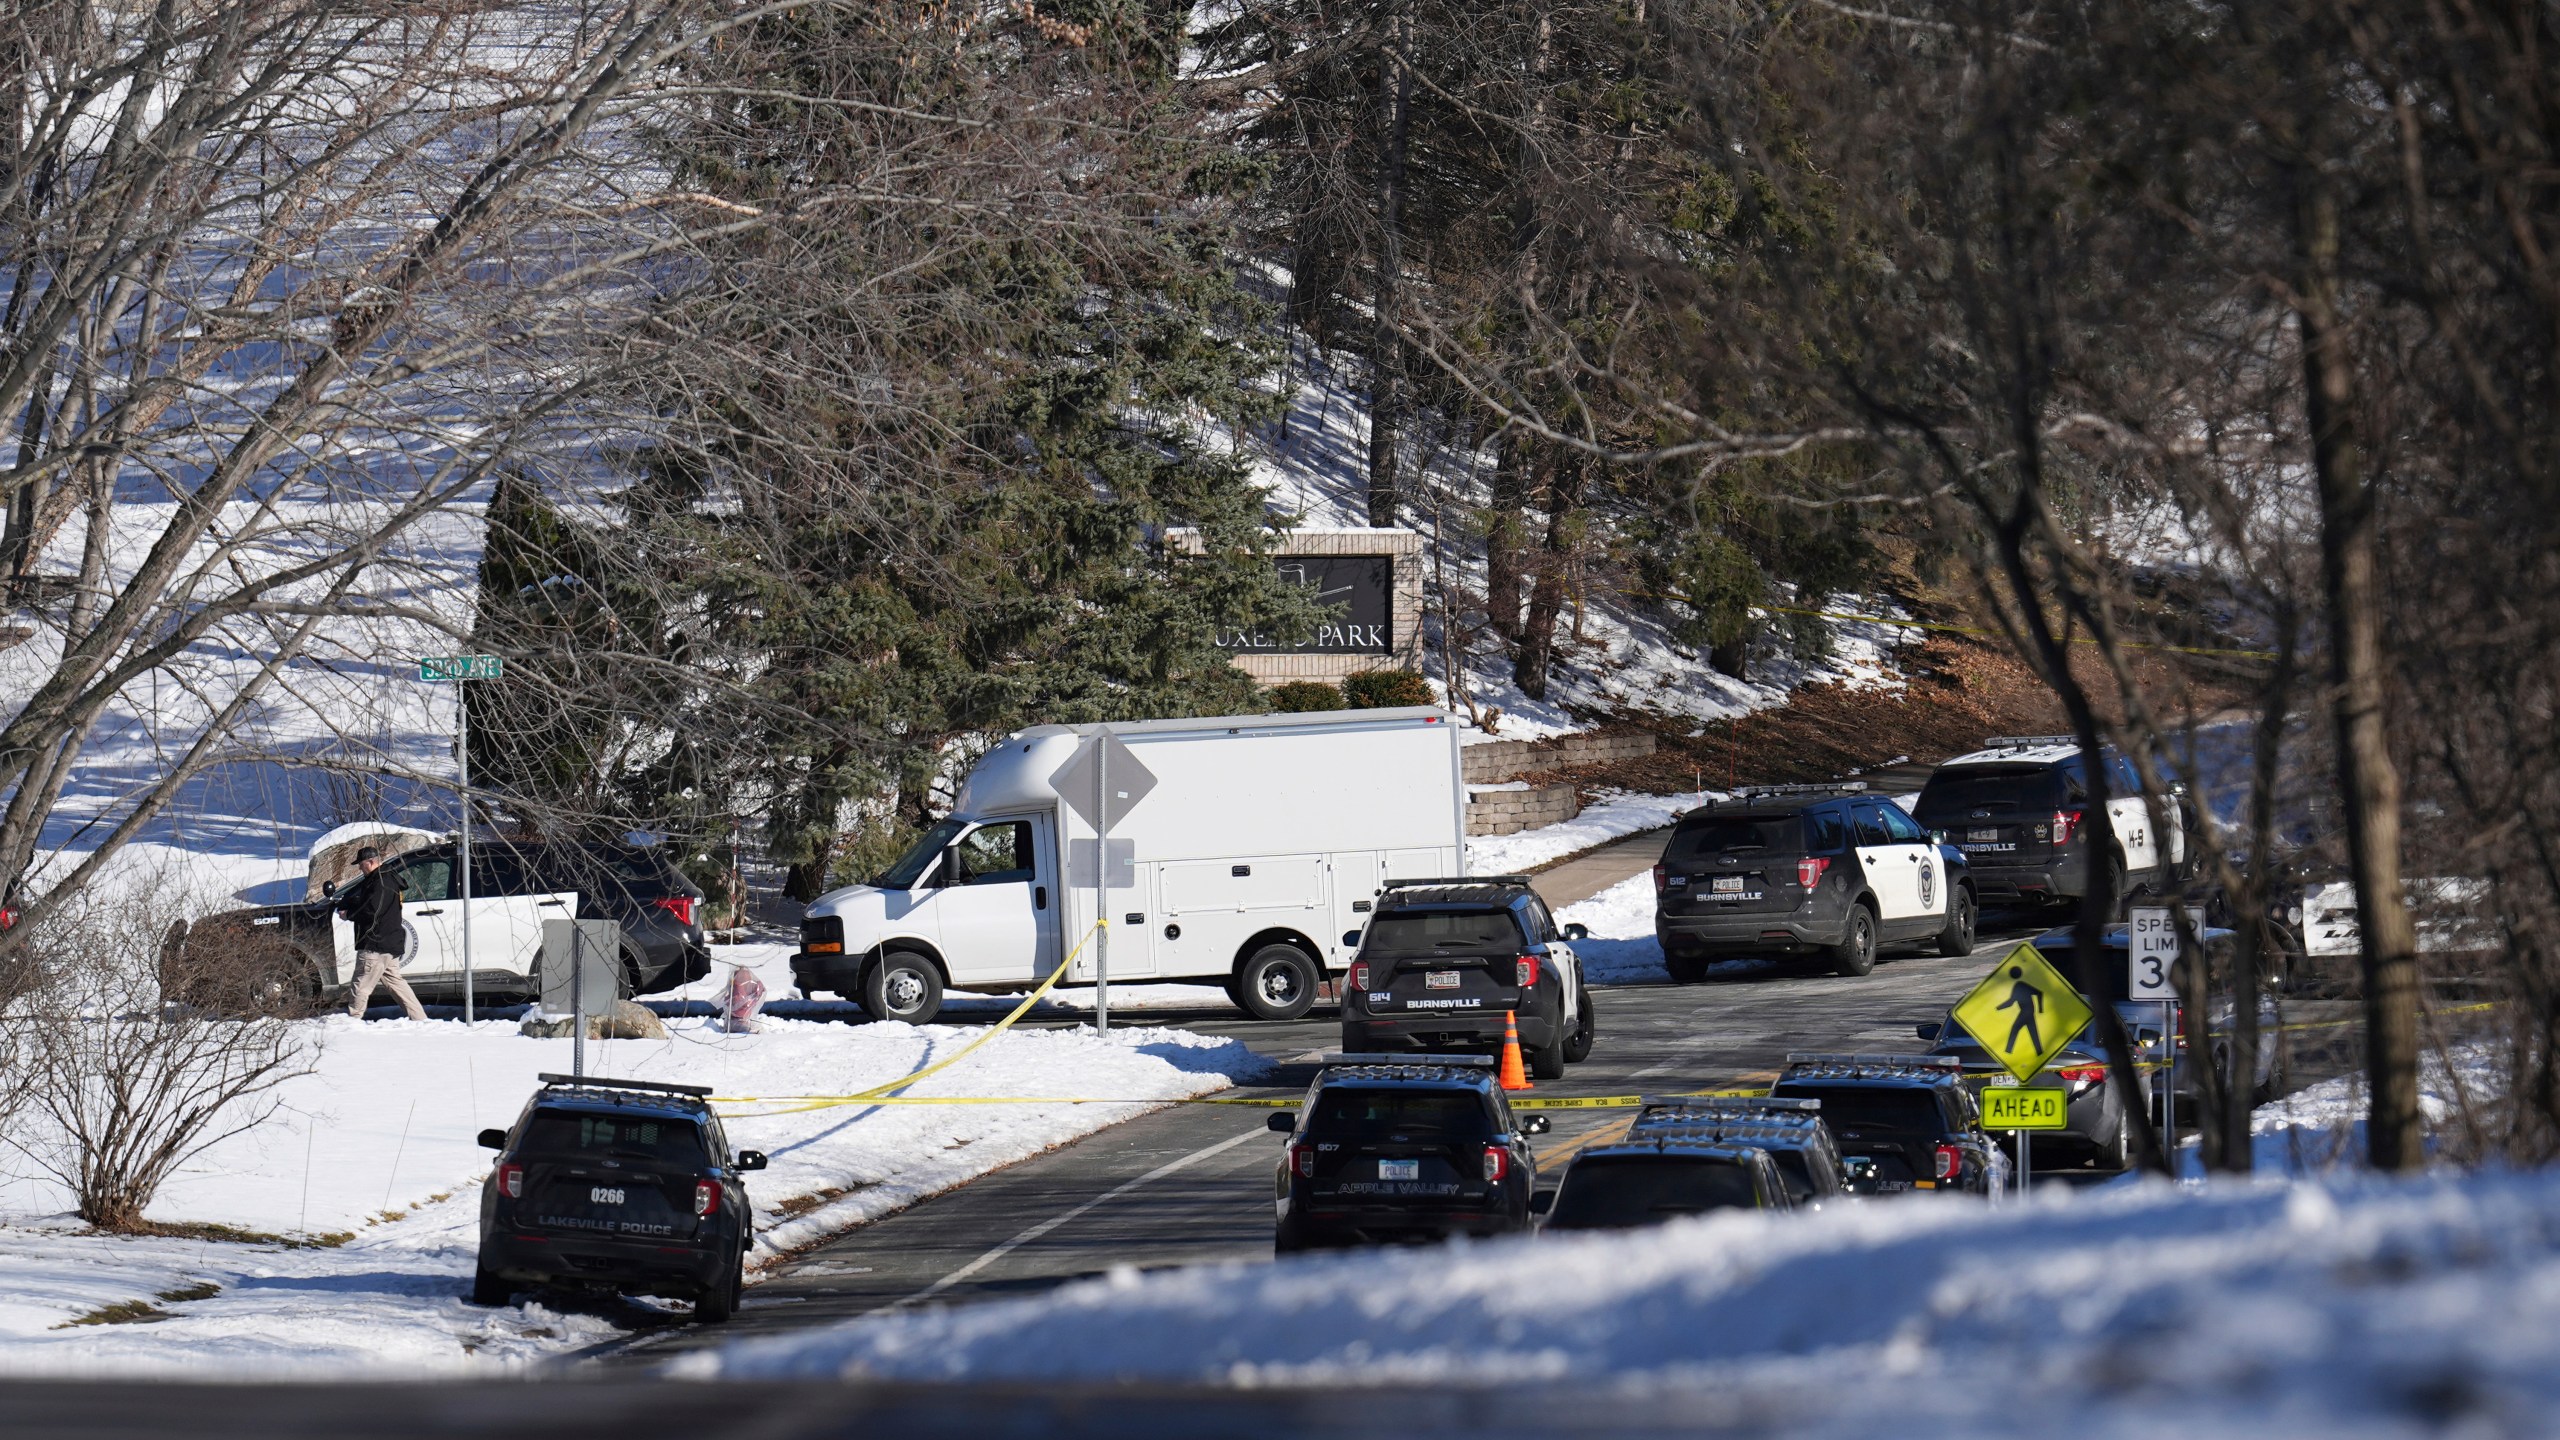 FILE - Law enforcement vehicles are parked near the scene where two police officers and a first responder were shot and killed, Feb. 18, 2024, in Burnsville, Minn. A woman has been charged with illegally buying guns used in the killings of the three Minnesota first responders in a standoff at a home in Burnsville, where seven children were inside, U.S. Attorney Andrew M. Luger announced Thursday, March 14, at a news conference. (AP Photo/Abbie Parr, File)